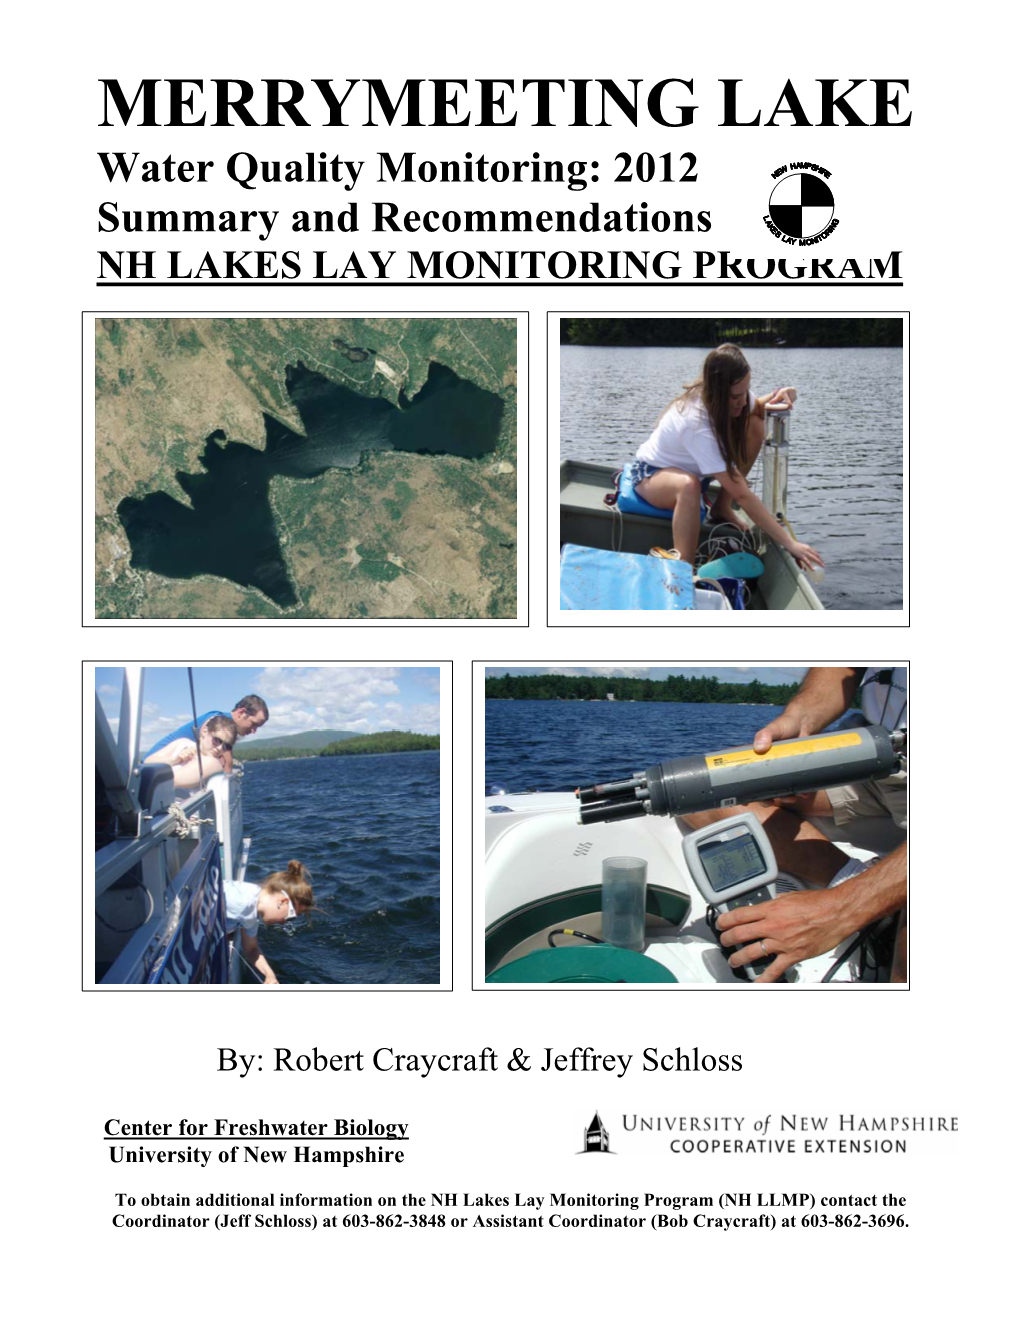 MERRYMEETING LAKE Water Quality Monitoring: 2012 Summary and Recommendations NH LAKES LAY MONITORING PROGRAM